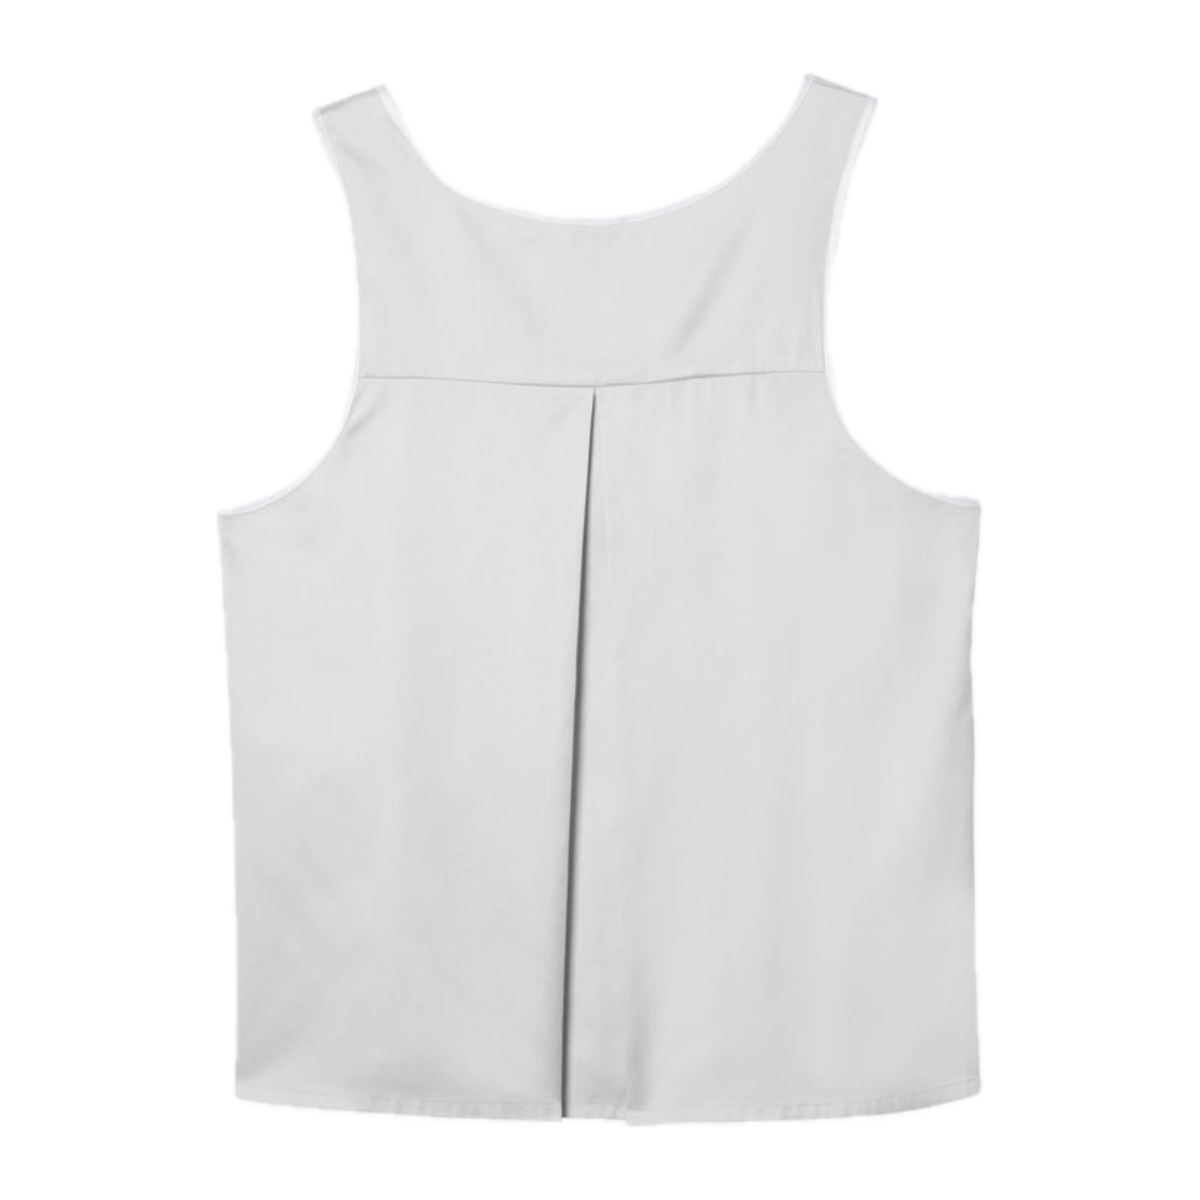 Back View of Tin Sferra Caricia Swing Tank Top against a white background